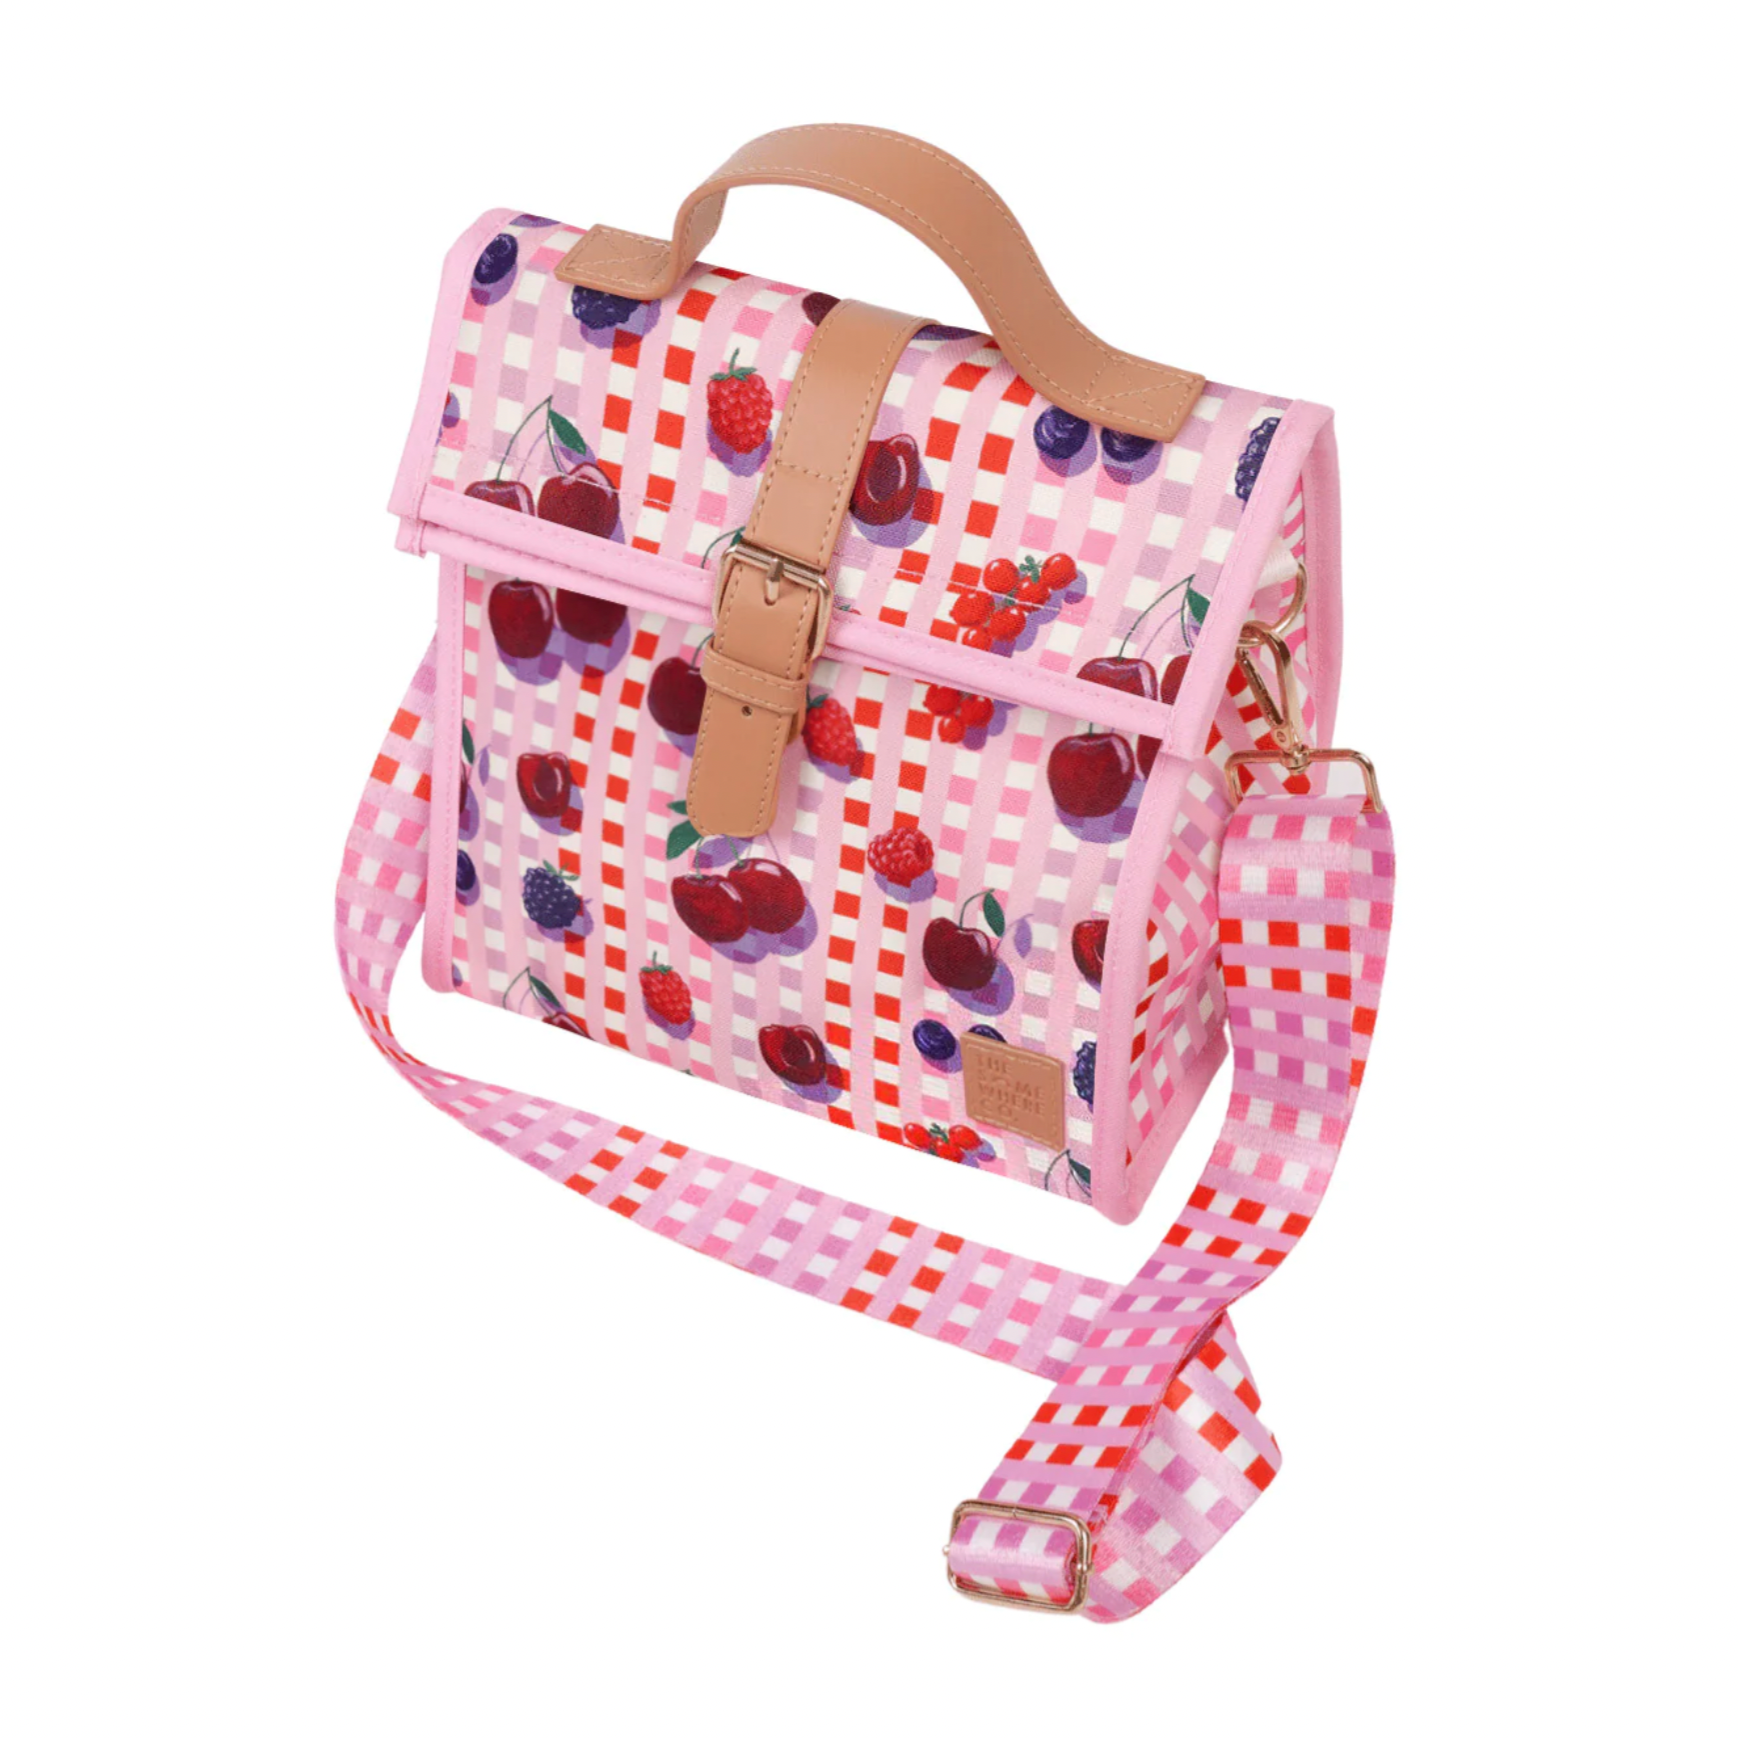 THE SOMEWHERE CO SUNDAE CHERRIES LUNCH SATCHEL WITH SHOULDER STRAP